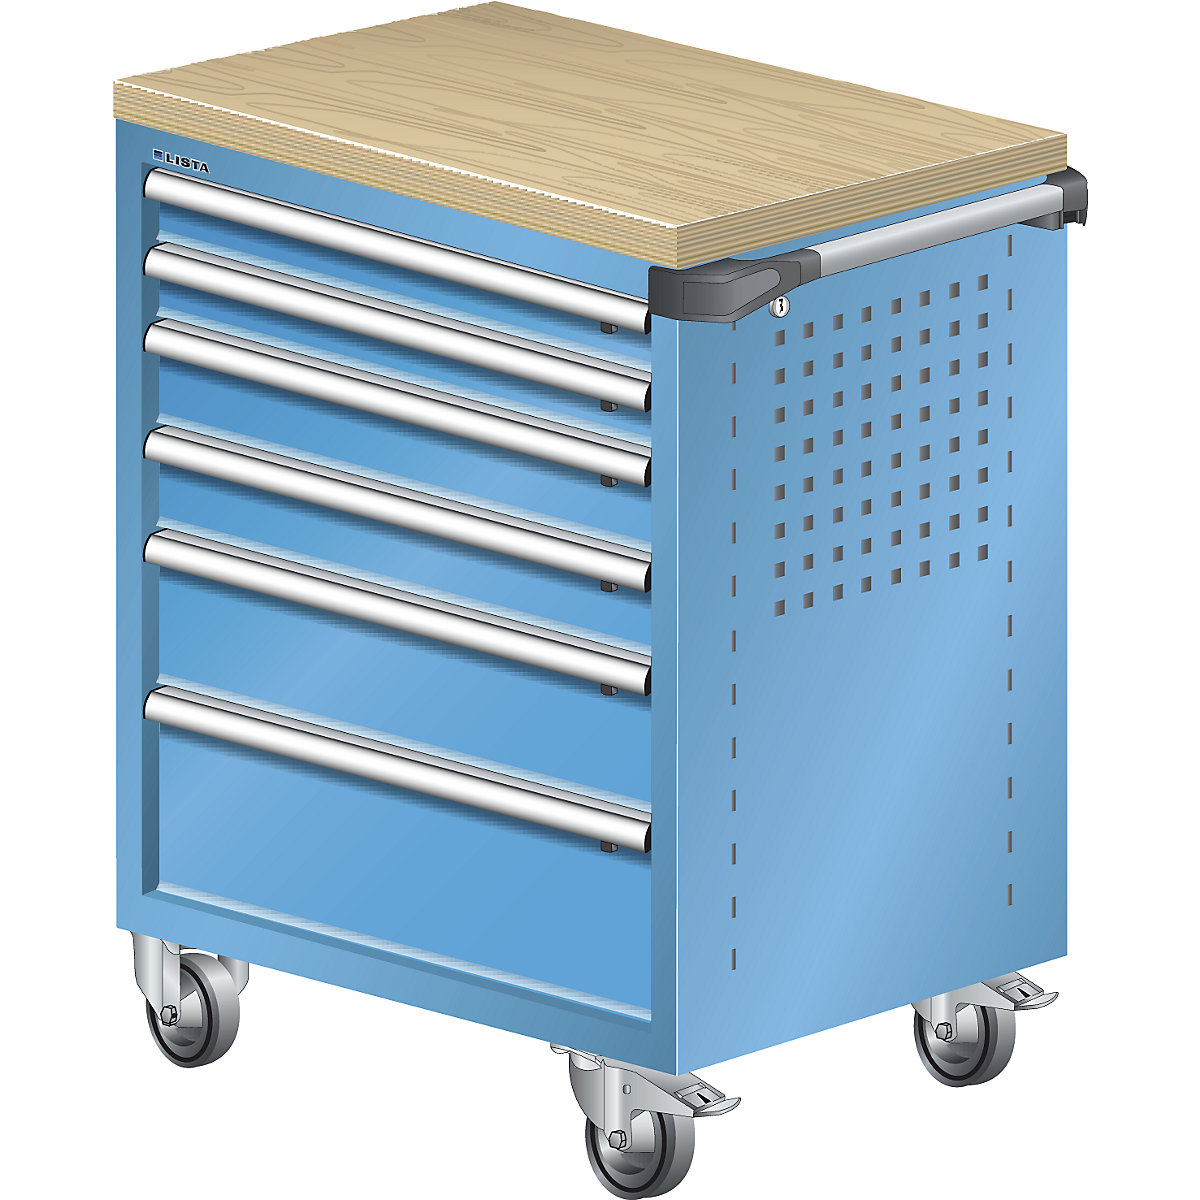 Workshop trolley – LISTA, with multiplex wooden cover 40 mm, 6 drawers, blue-3